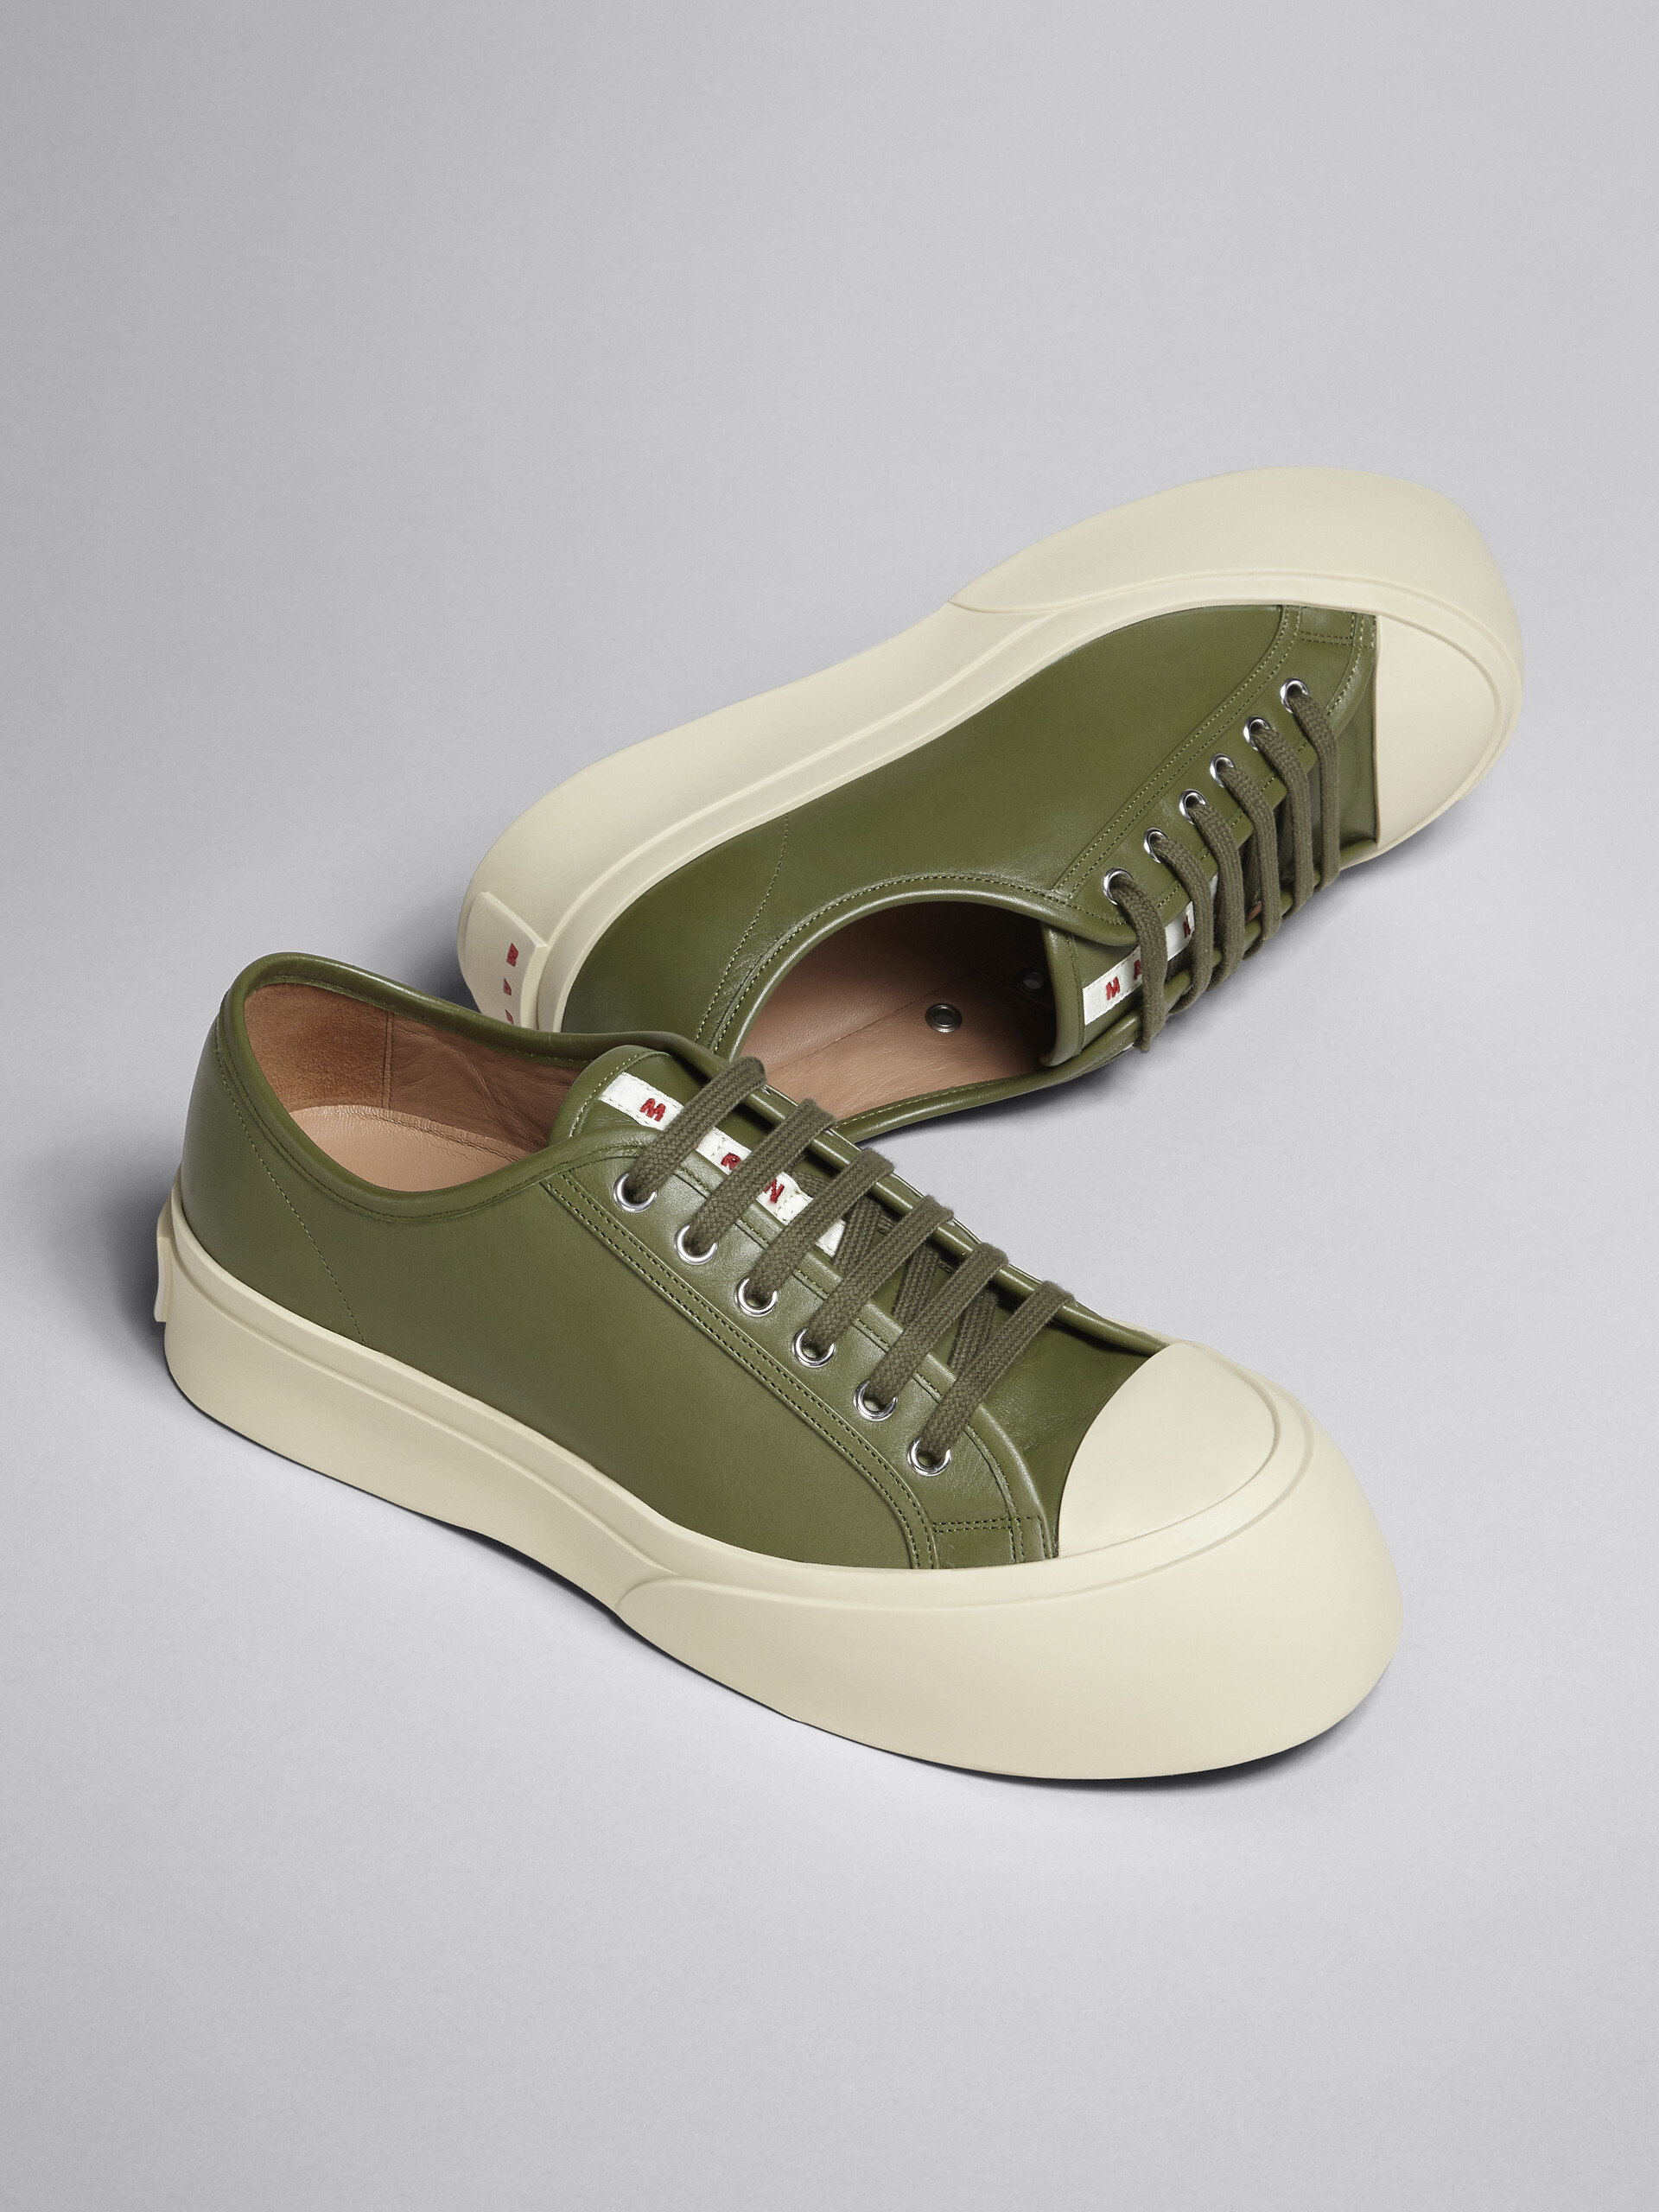 Green soft calf leather PABLO sneaker - Sneakers - Image 5